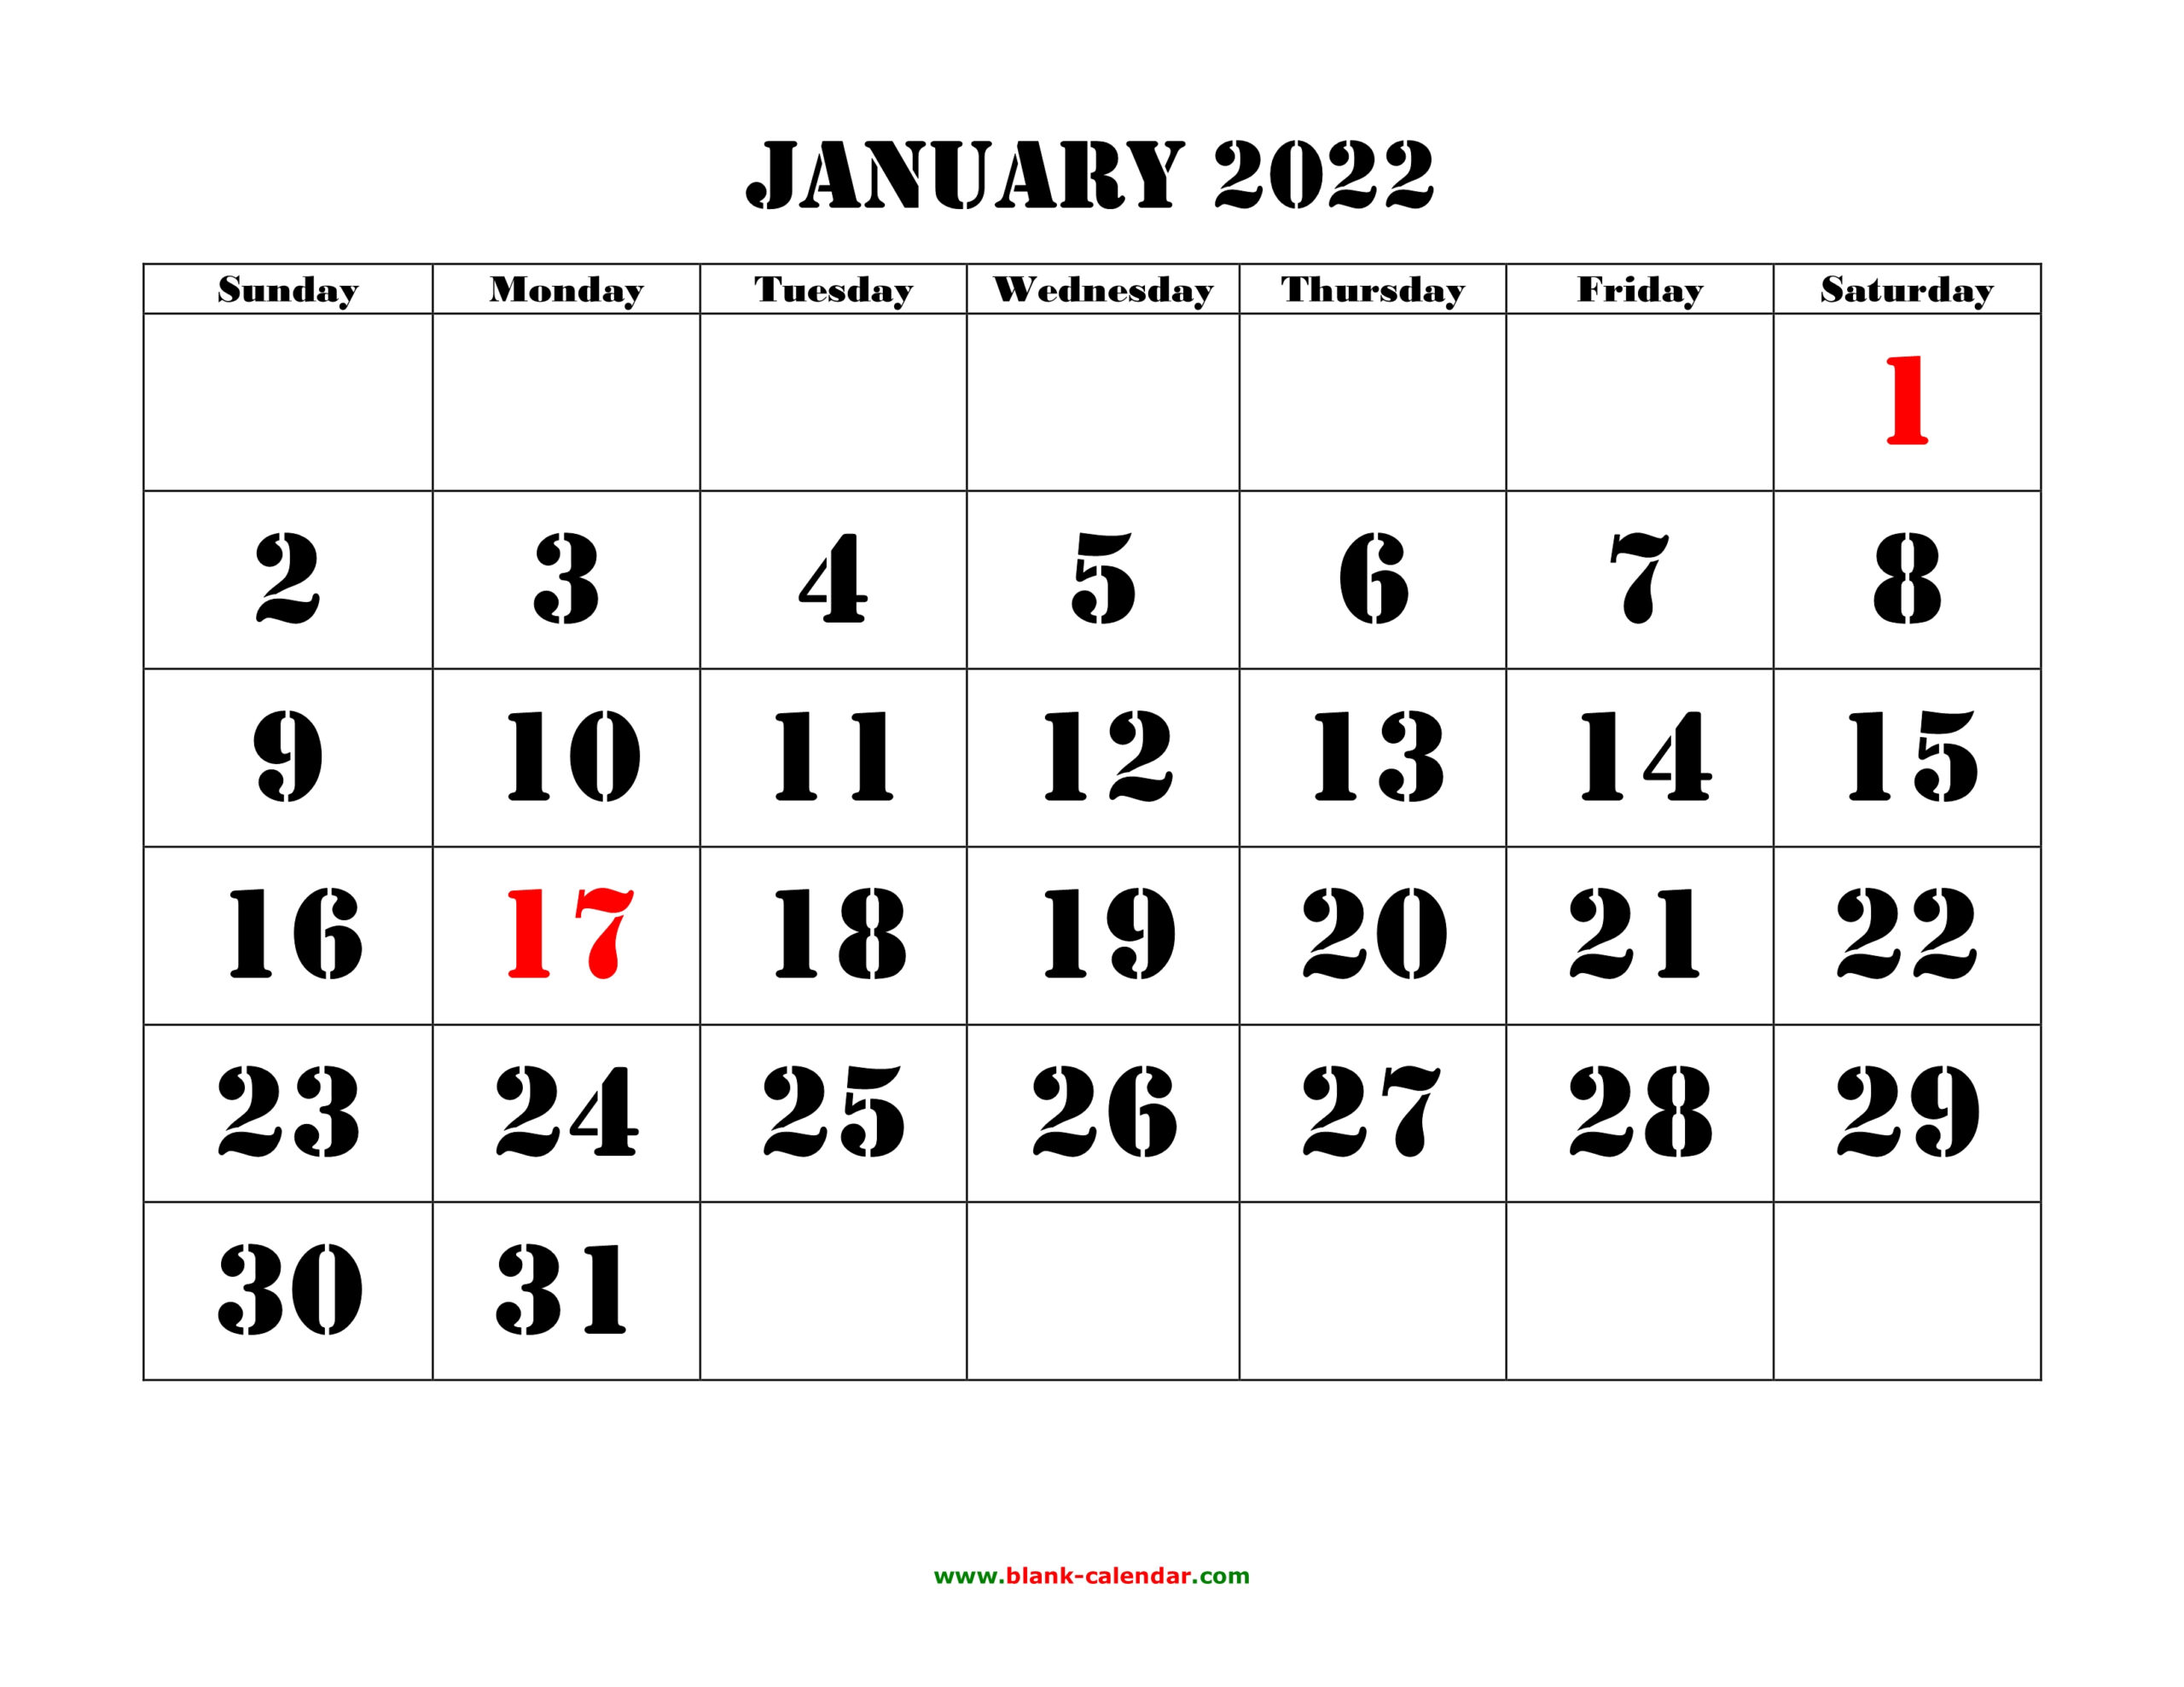 Printable Calendar 2022 | Free Download Yearly Calendar Templates within Next Year Calendar 2022